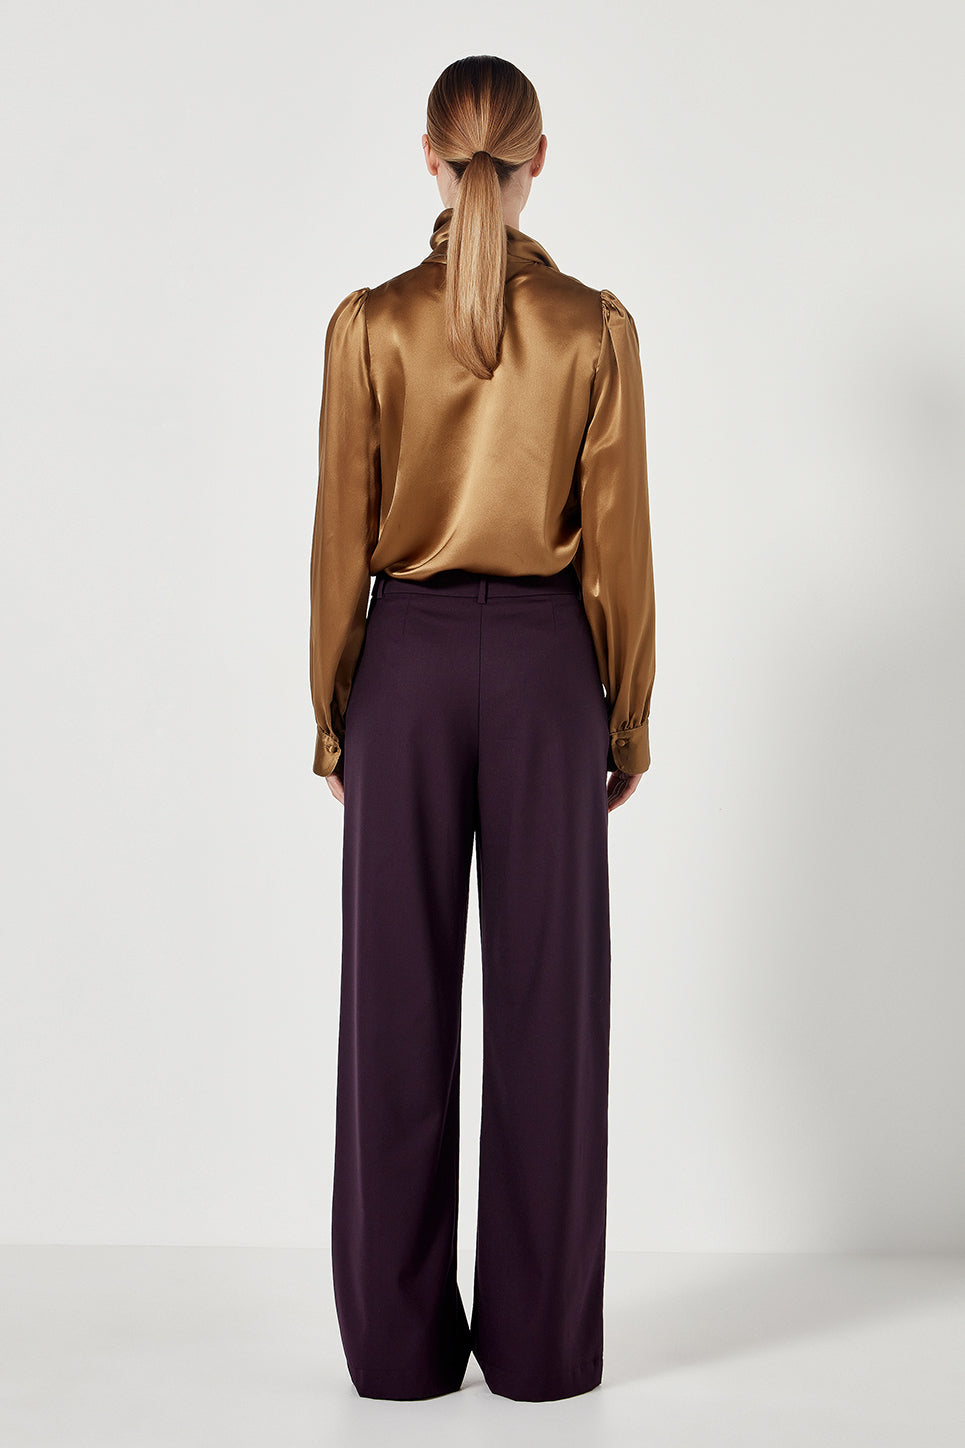 The Bowie Blouse in Gold